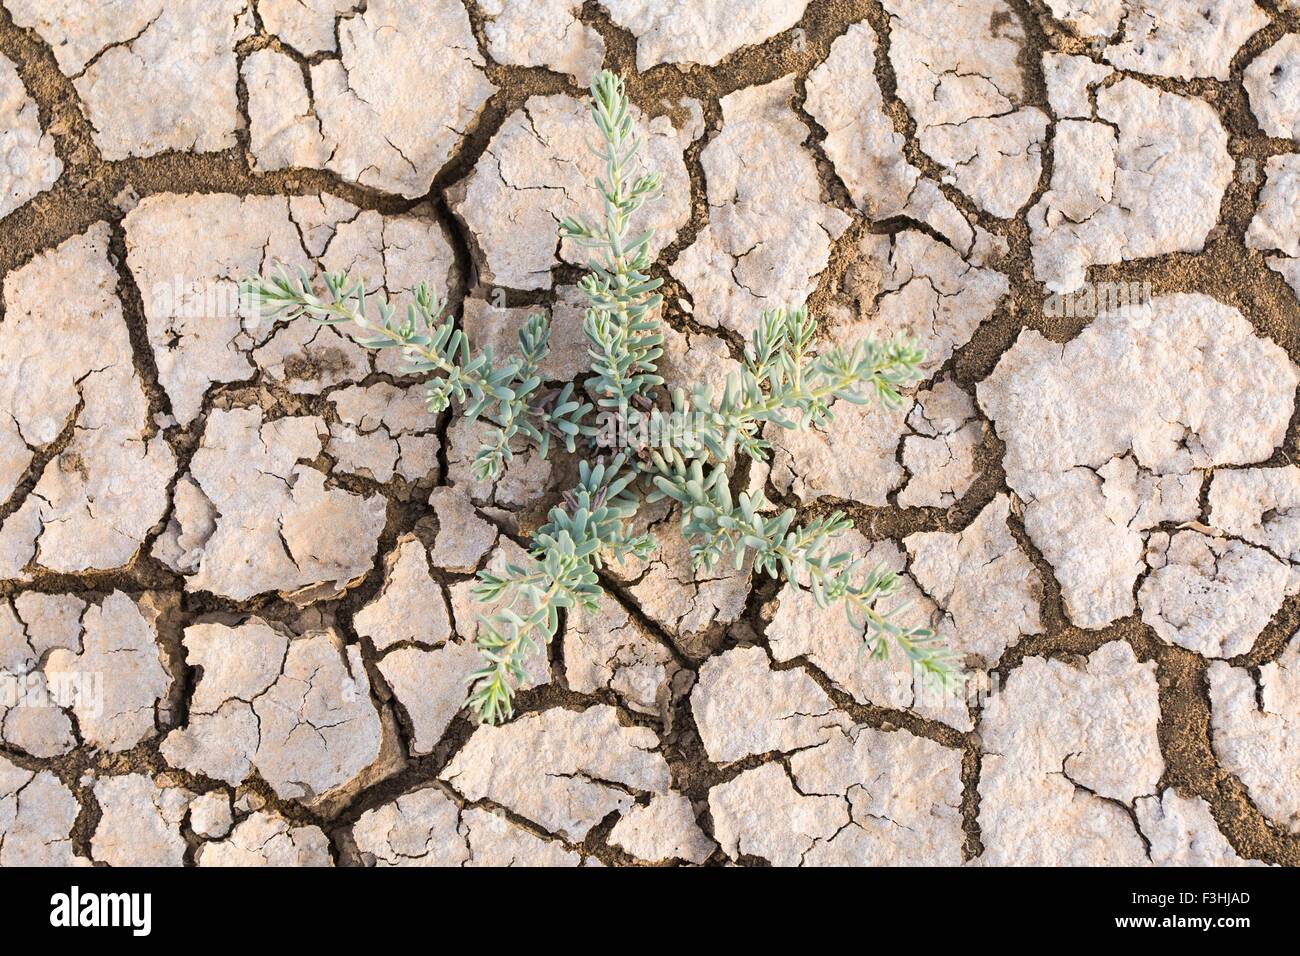 Overhead view of succulent plant and dried cracked mud on floodplain, Djoudj National Park, Senegal Stock Photo